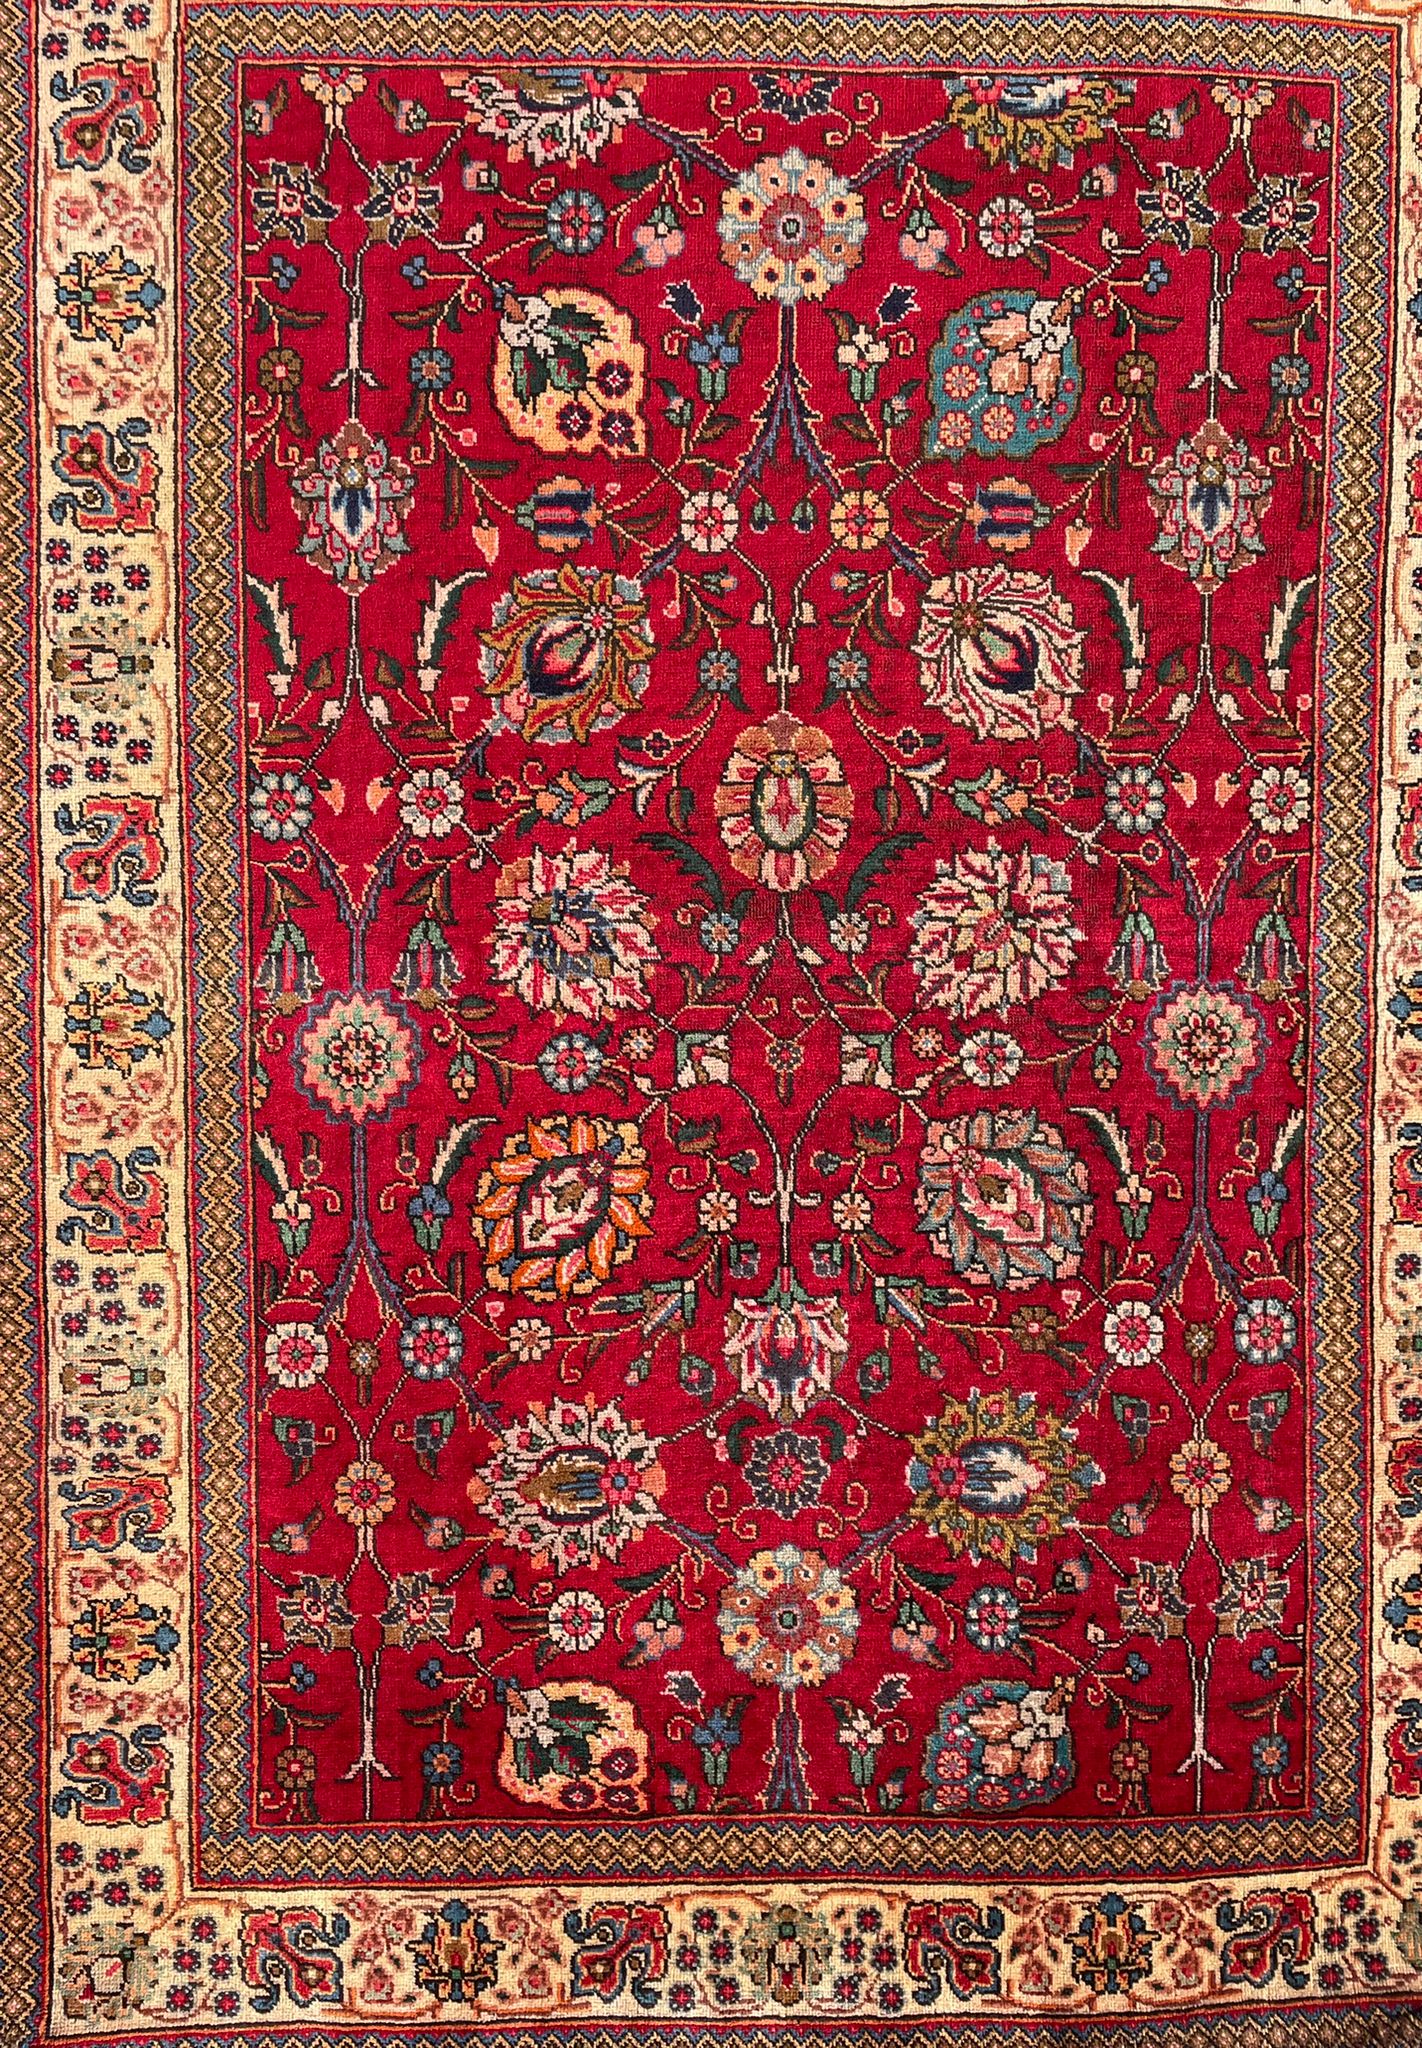 AN EARLY 20TH CENTURY HAND KNOTTED PERSIAN TABRIZ FLOOR RUG - Image 4 of 7